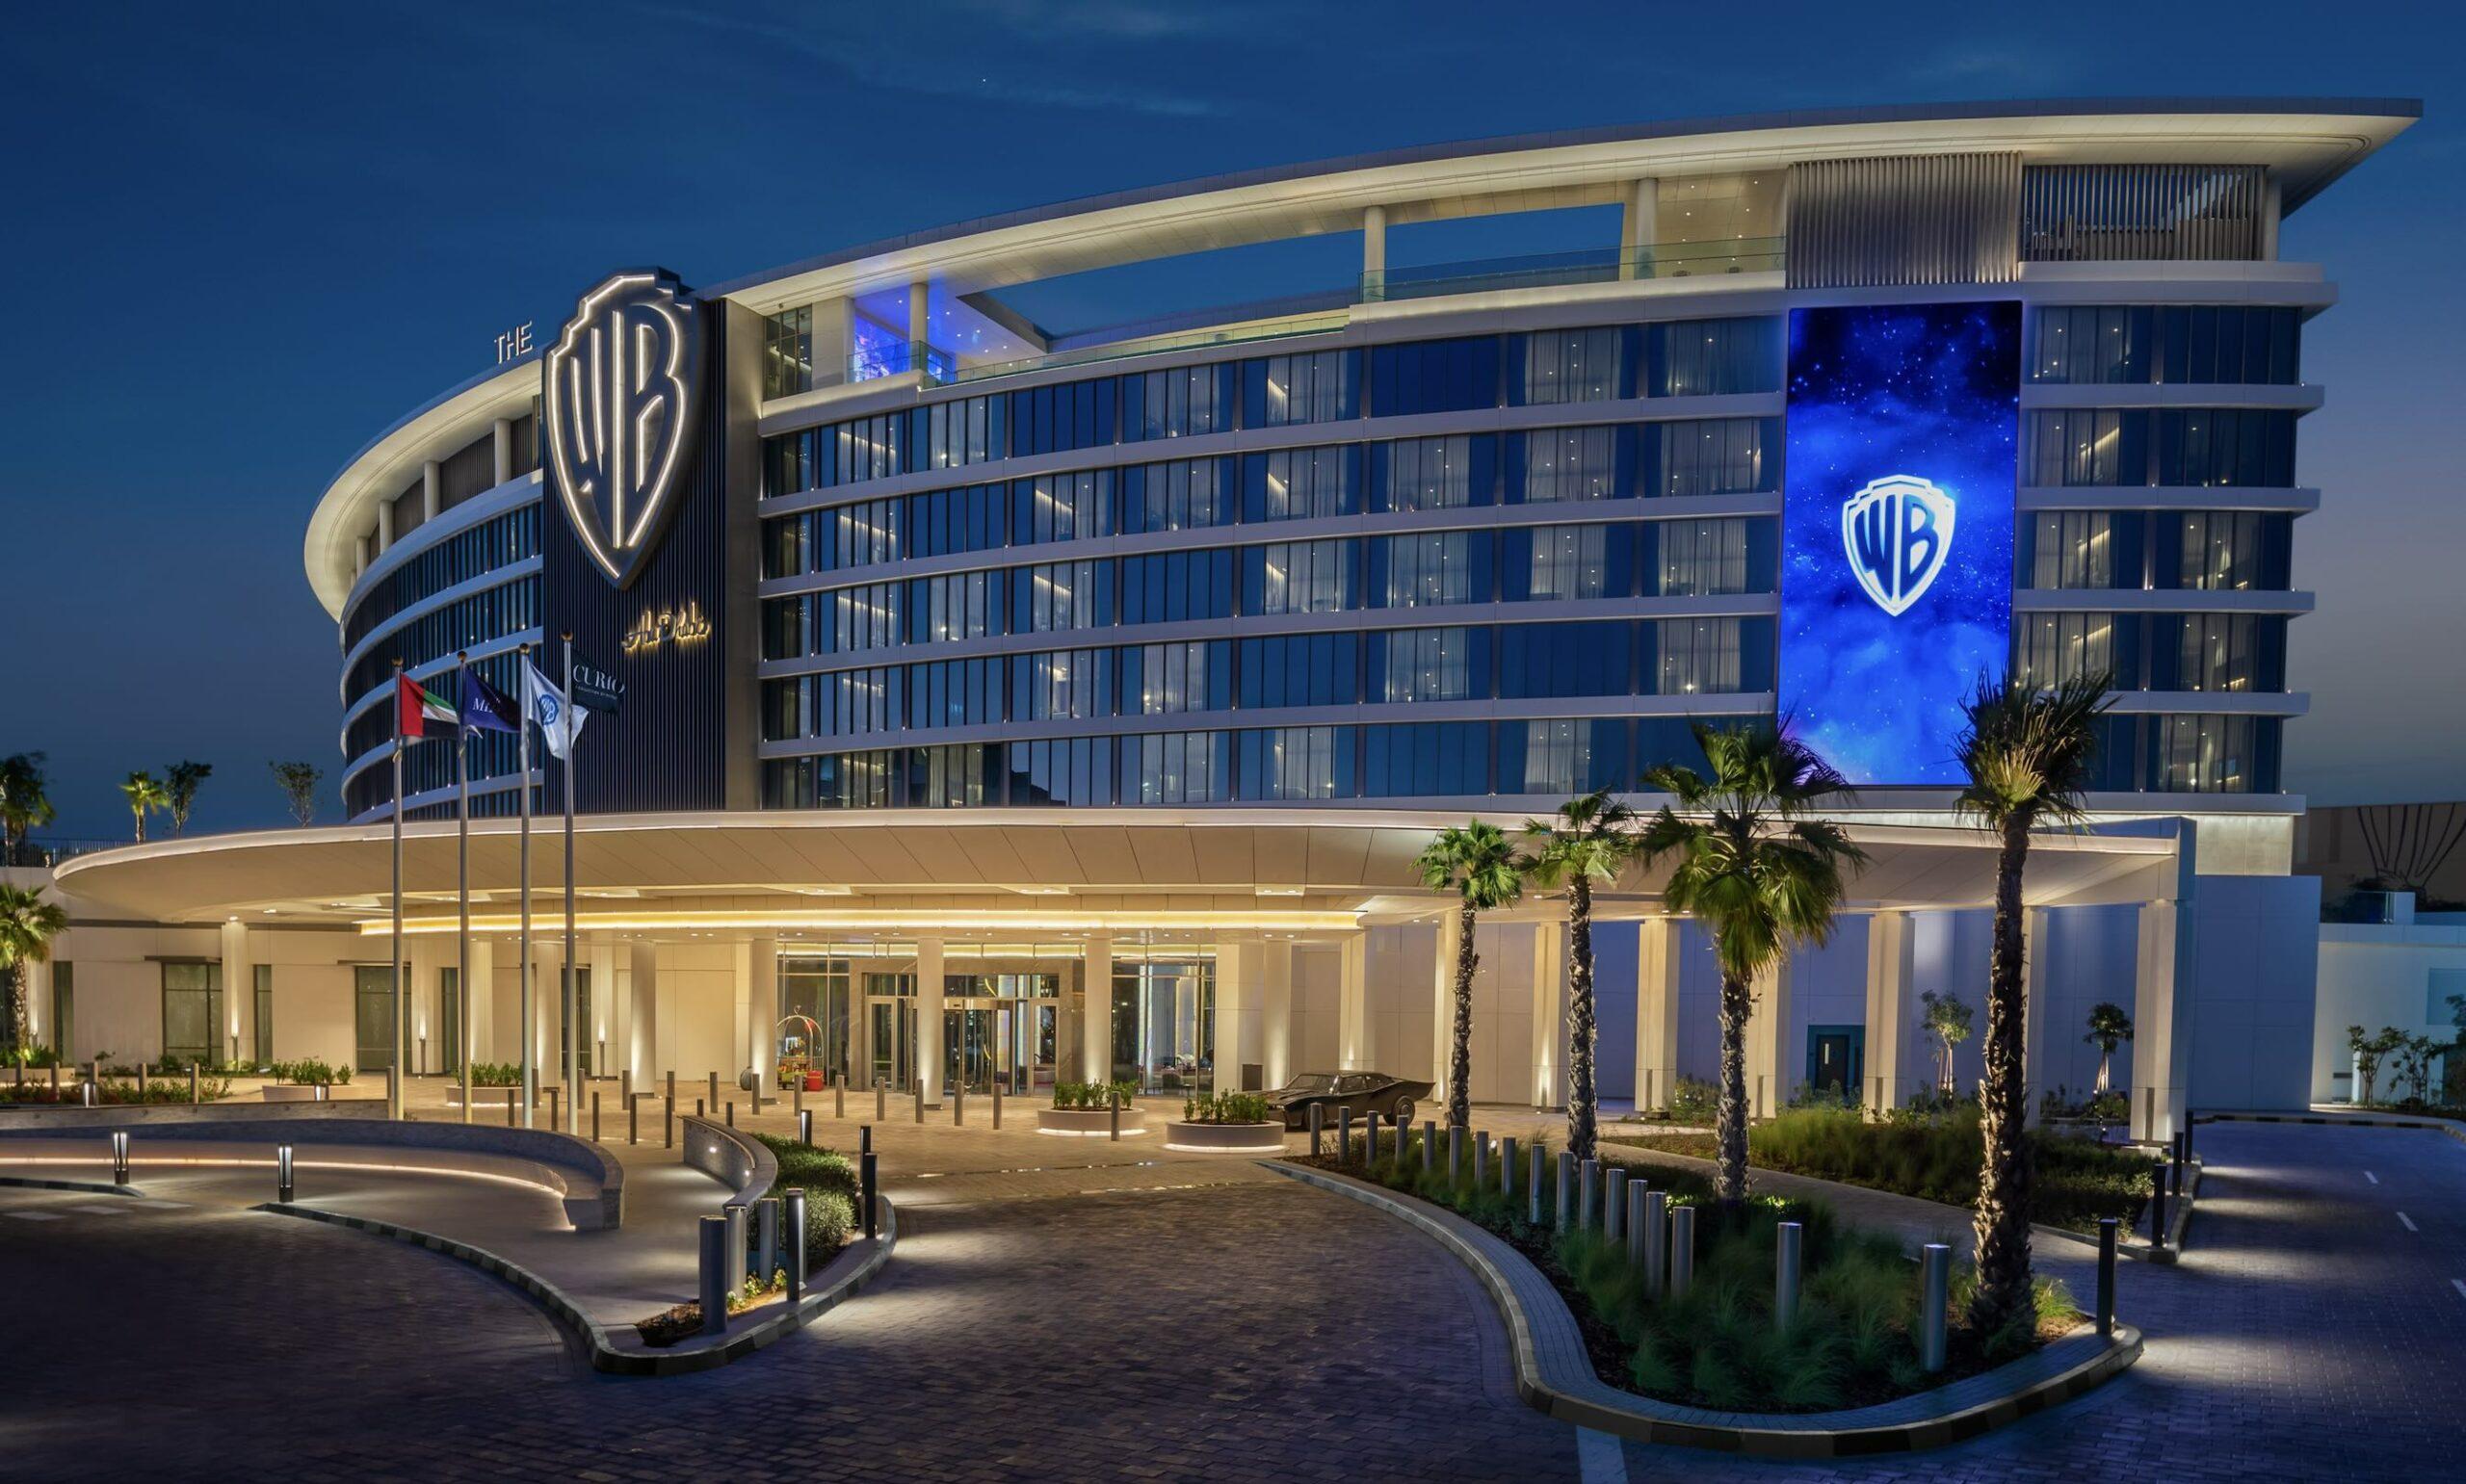 Escape into a world of fantasy at The WB™ Abu Dhabi